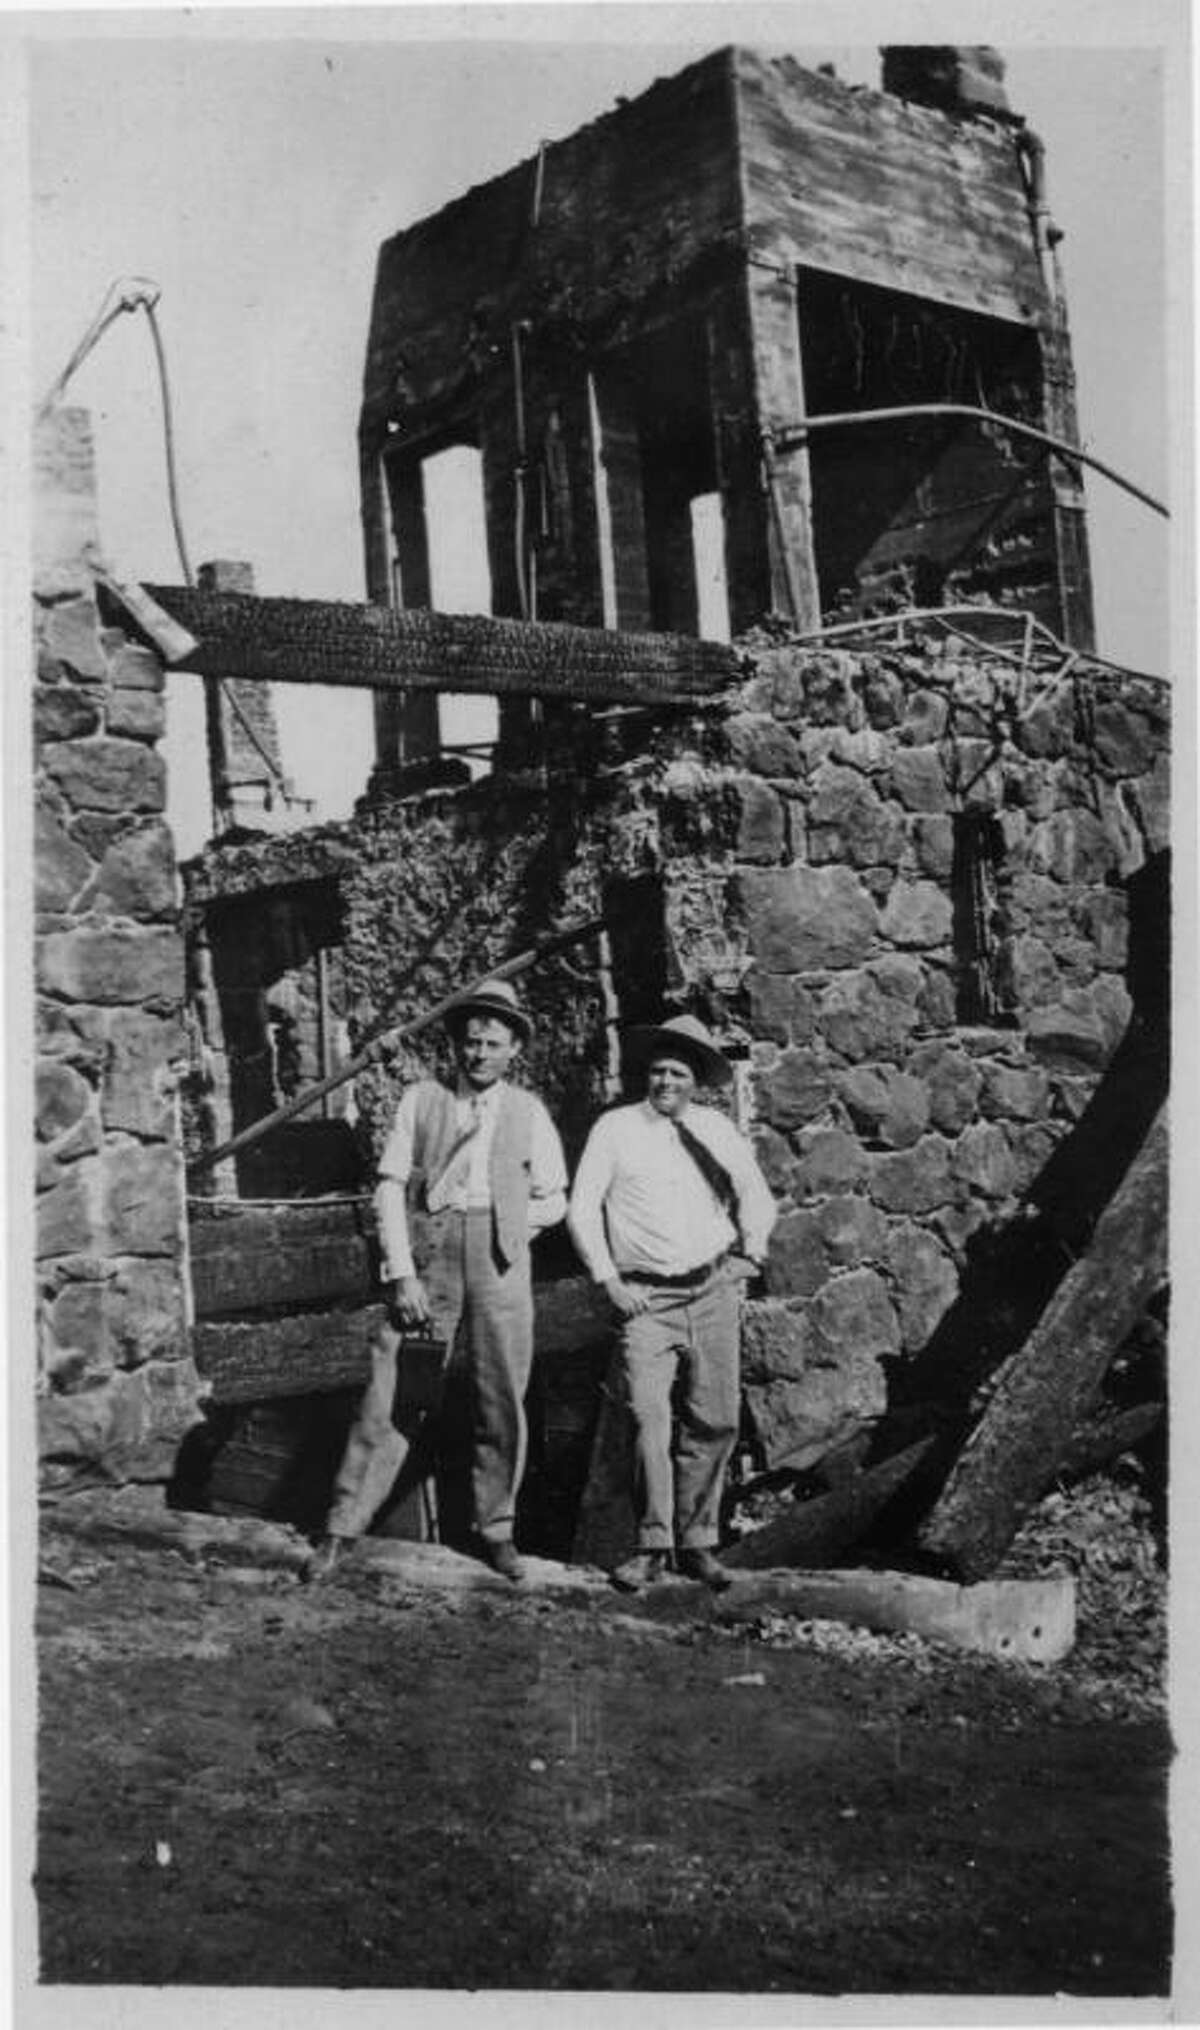 A historic photo shows Jack London (right) on site at Wolf House.